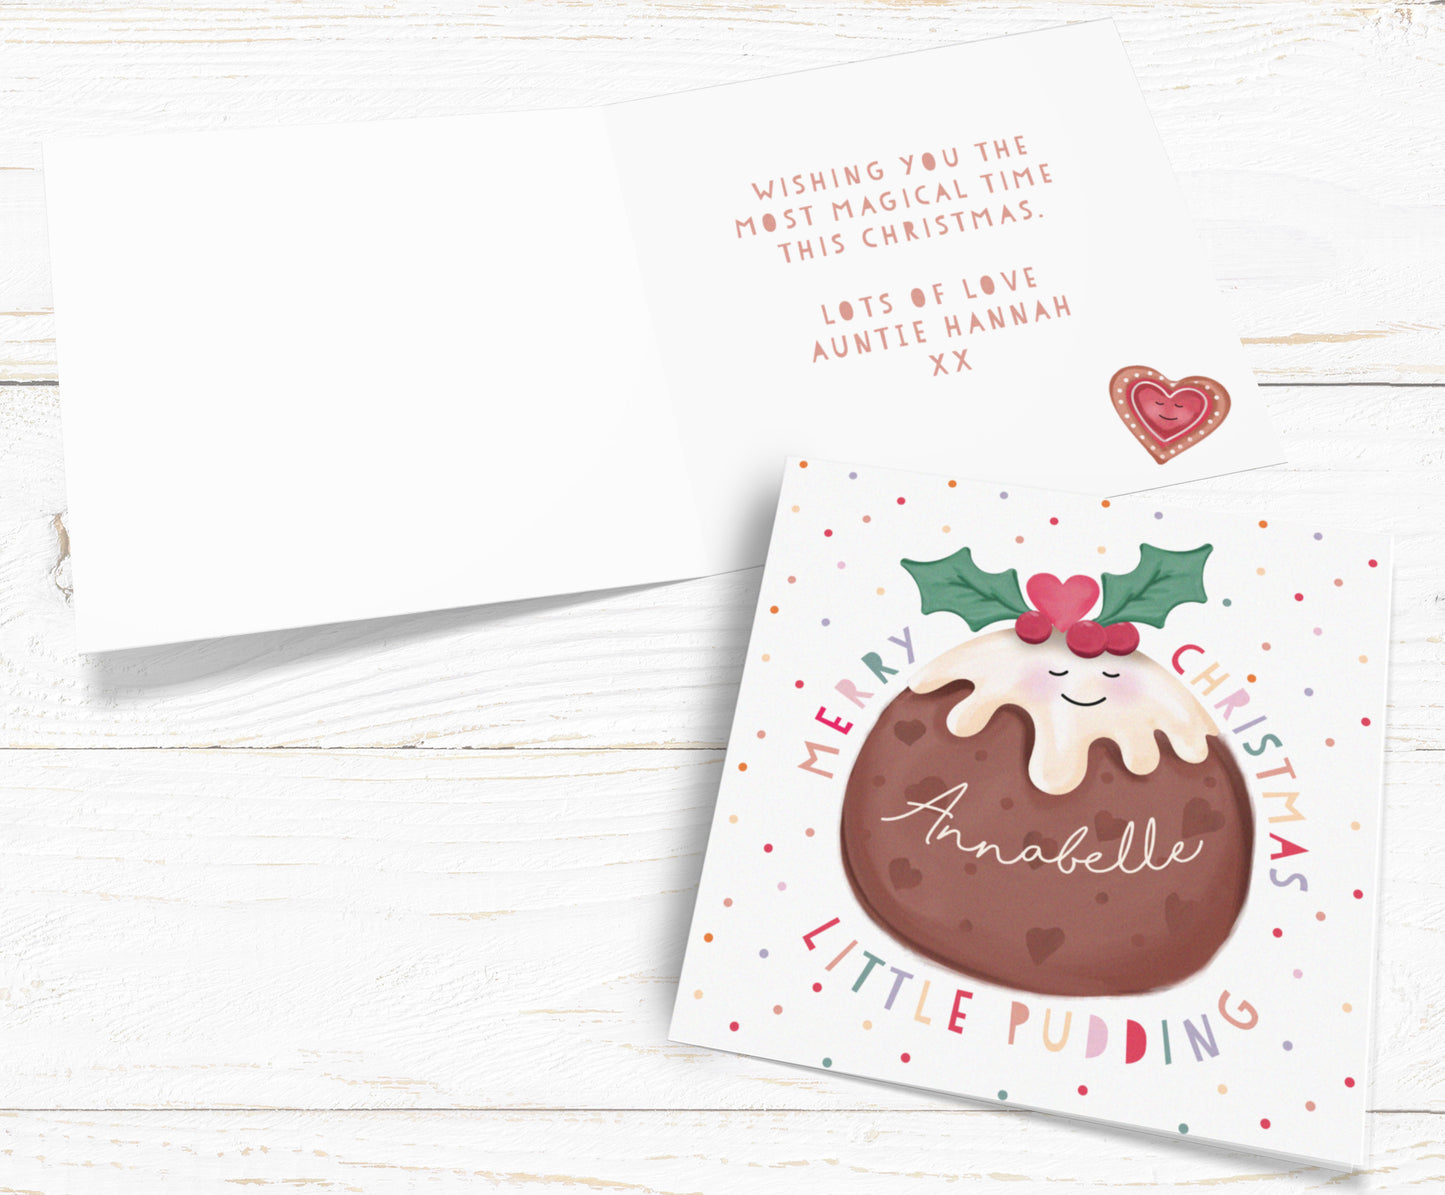 Little Pudding Christmas Card. Personalised Christmas Card. Christmas Pudding Personalised Card. Cute Christmas Cards. Send Direct Option.